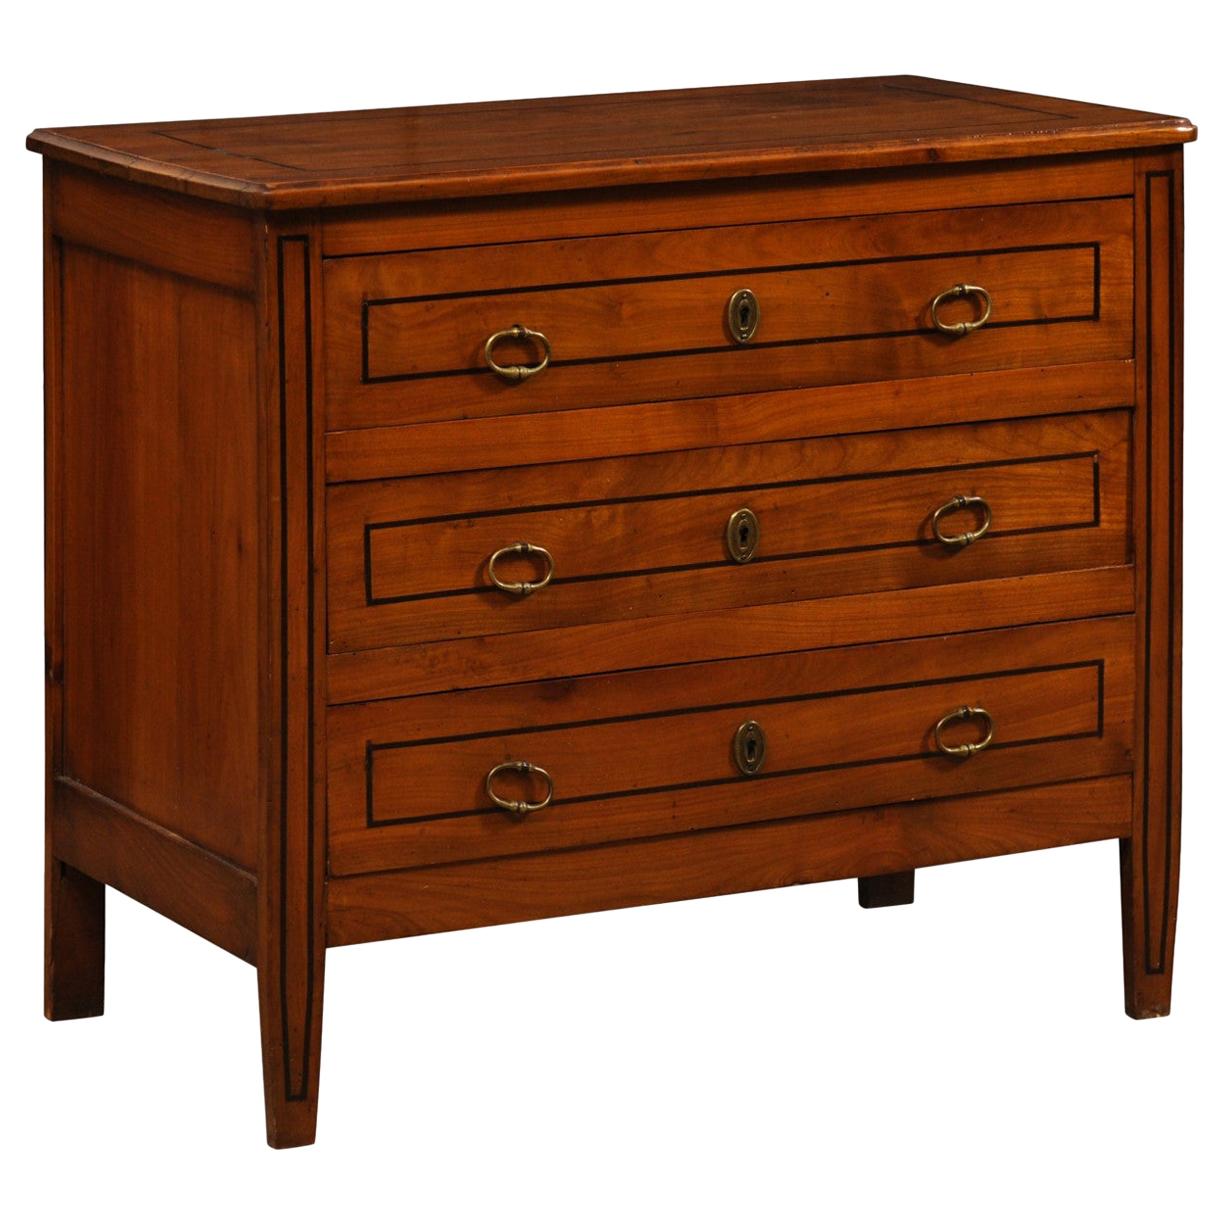 French Antique Three-Drawer Commode with Ebonized Inlay Accent Trim